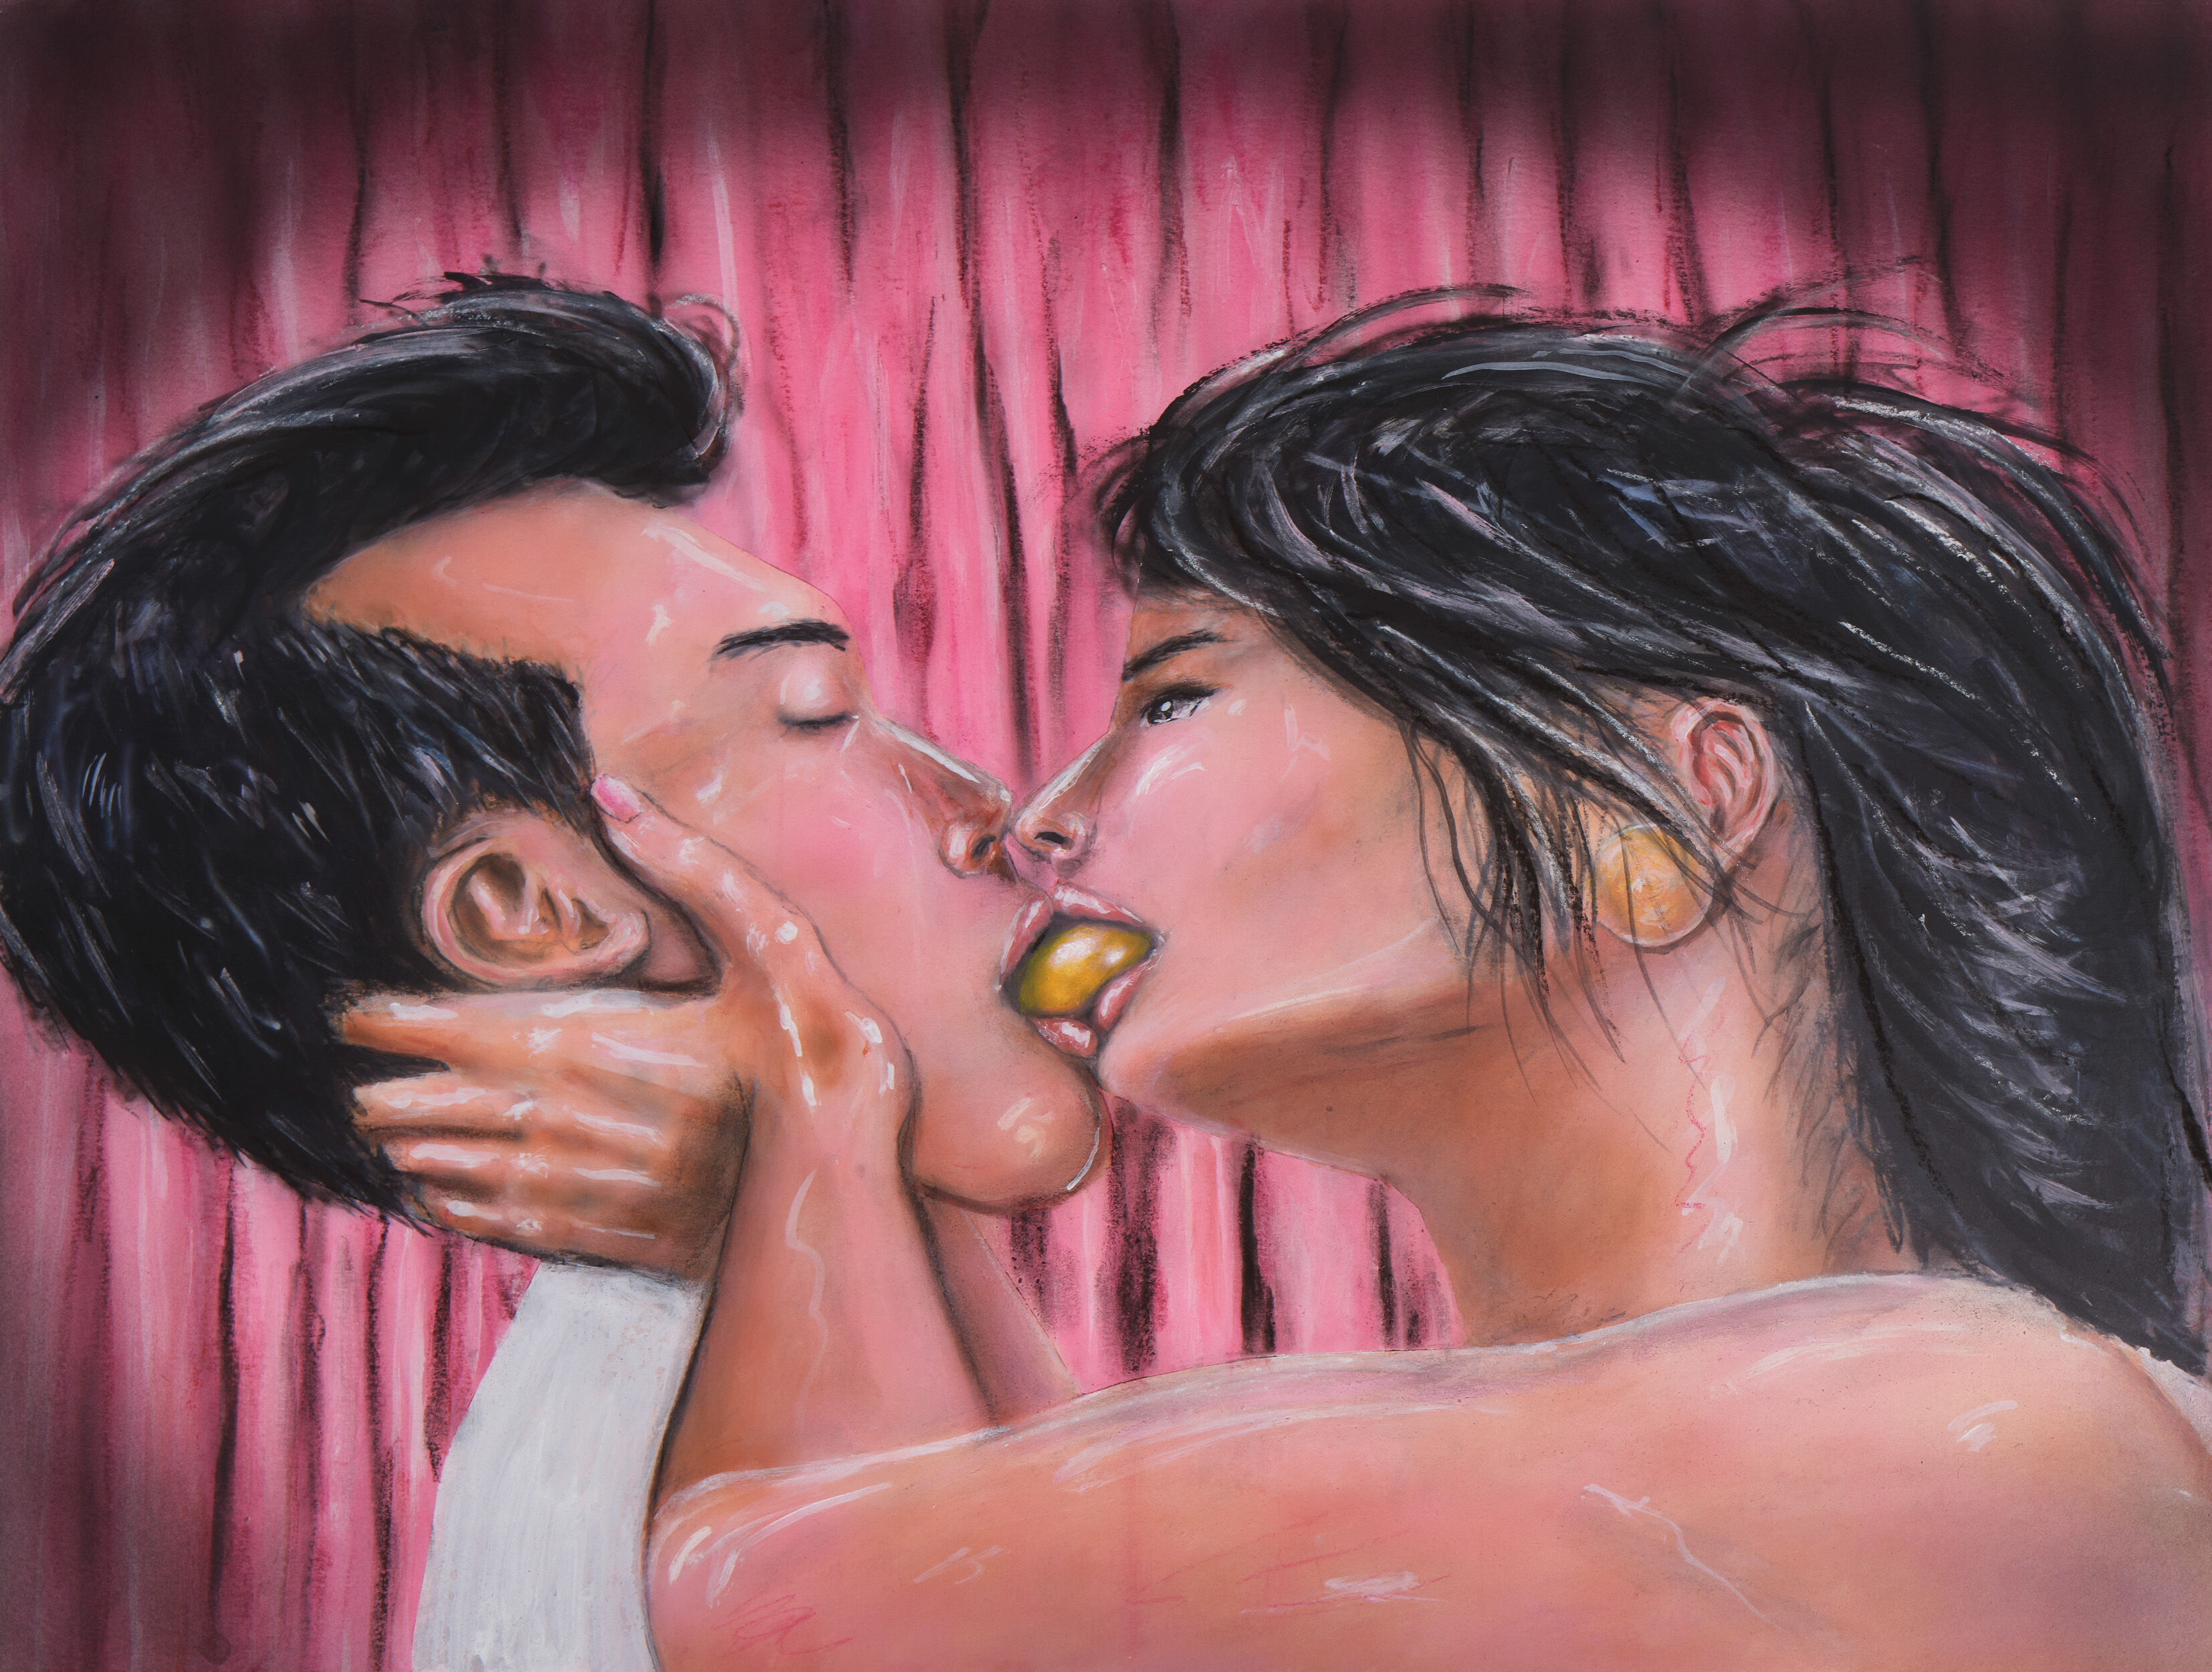 Daniel Wang's painting of two people kissing against the backdrop of a pink curtain